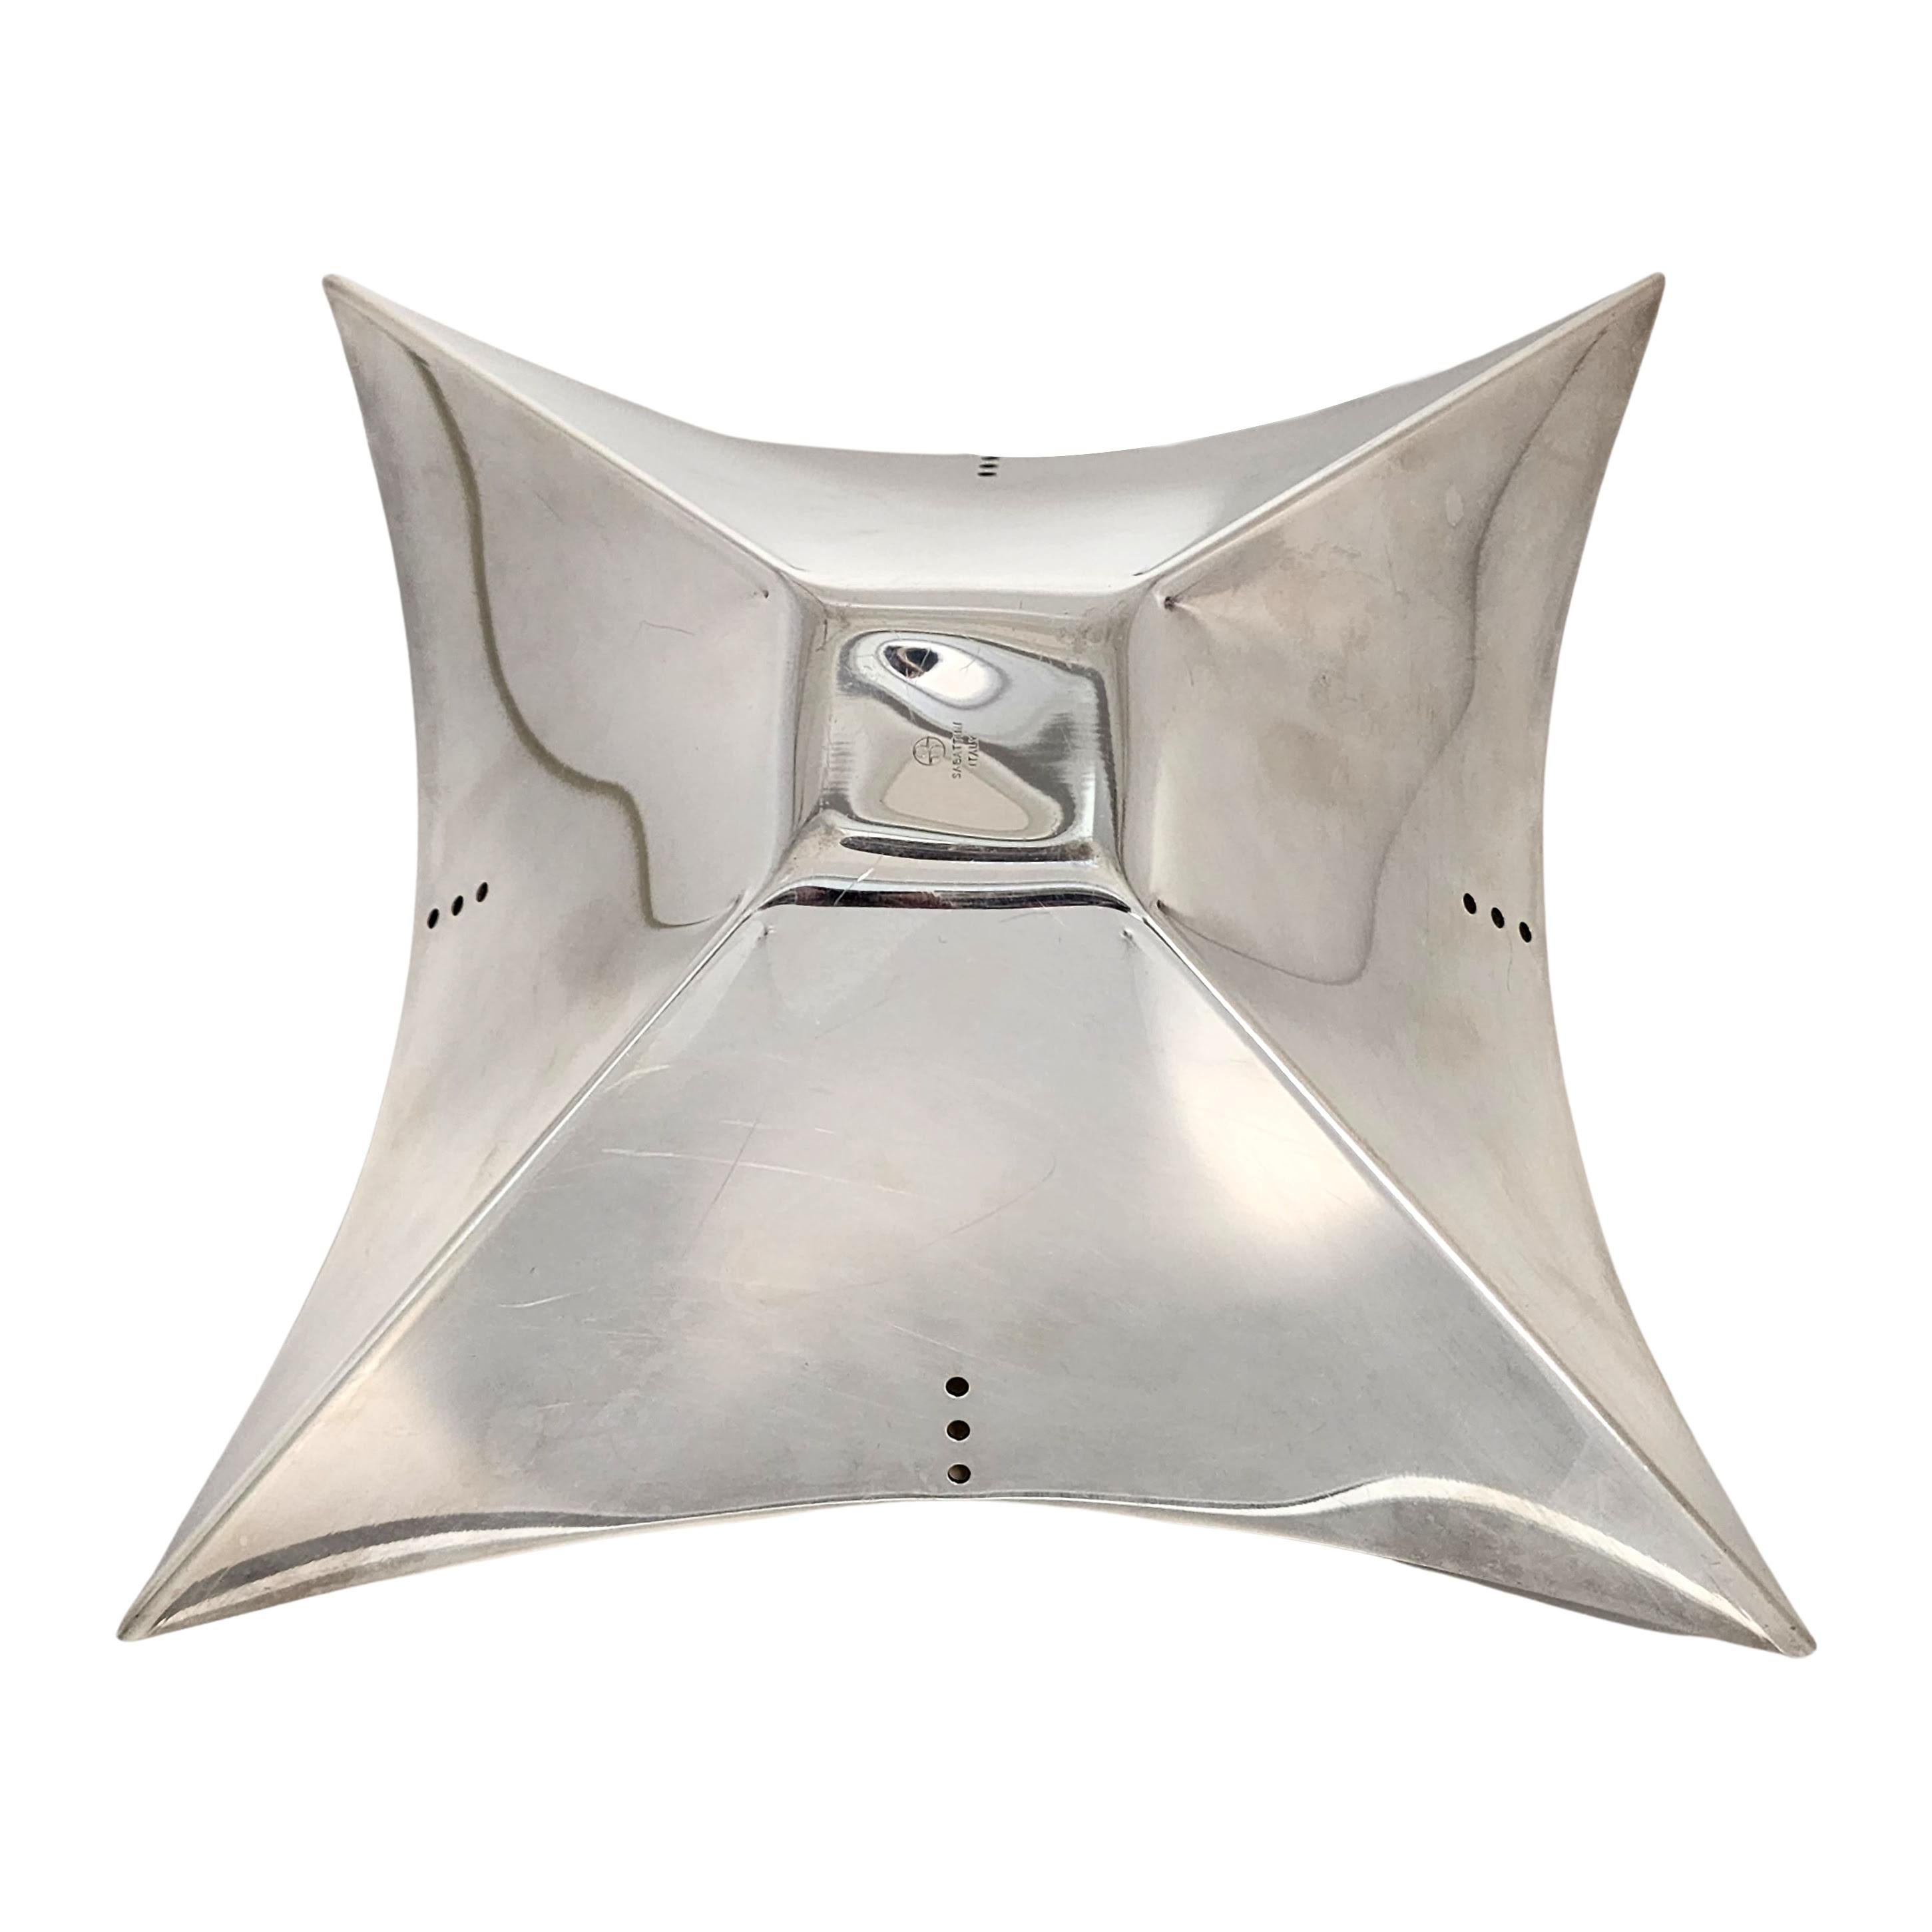 Lino Sabattini Italy Silver Plated Square Centerpiece Bowl In Good Condition For Sale In Washington Depot, CT